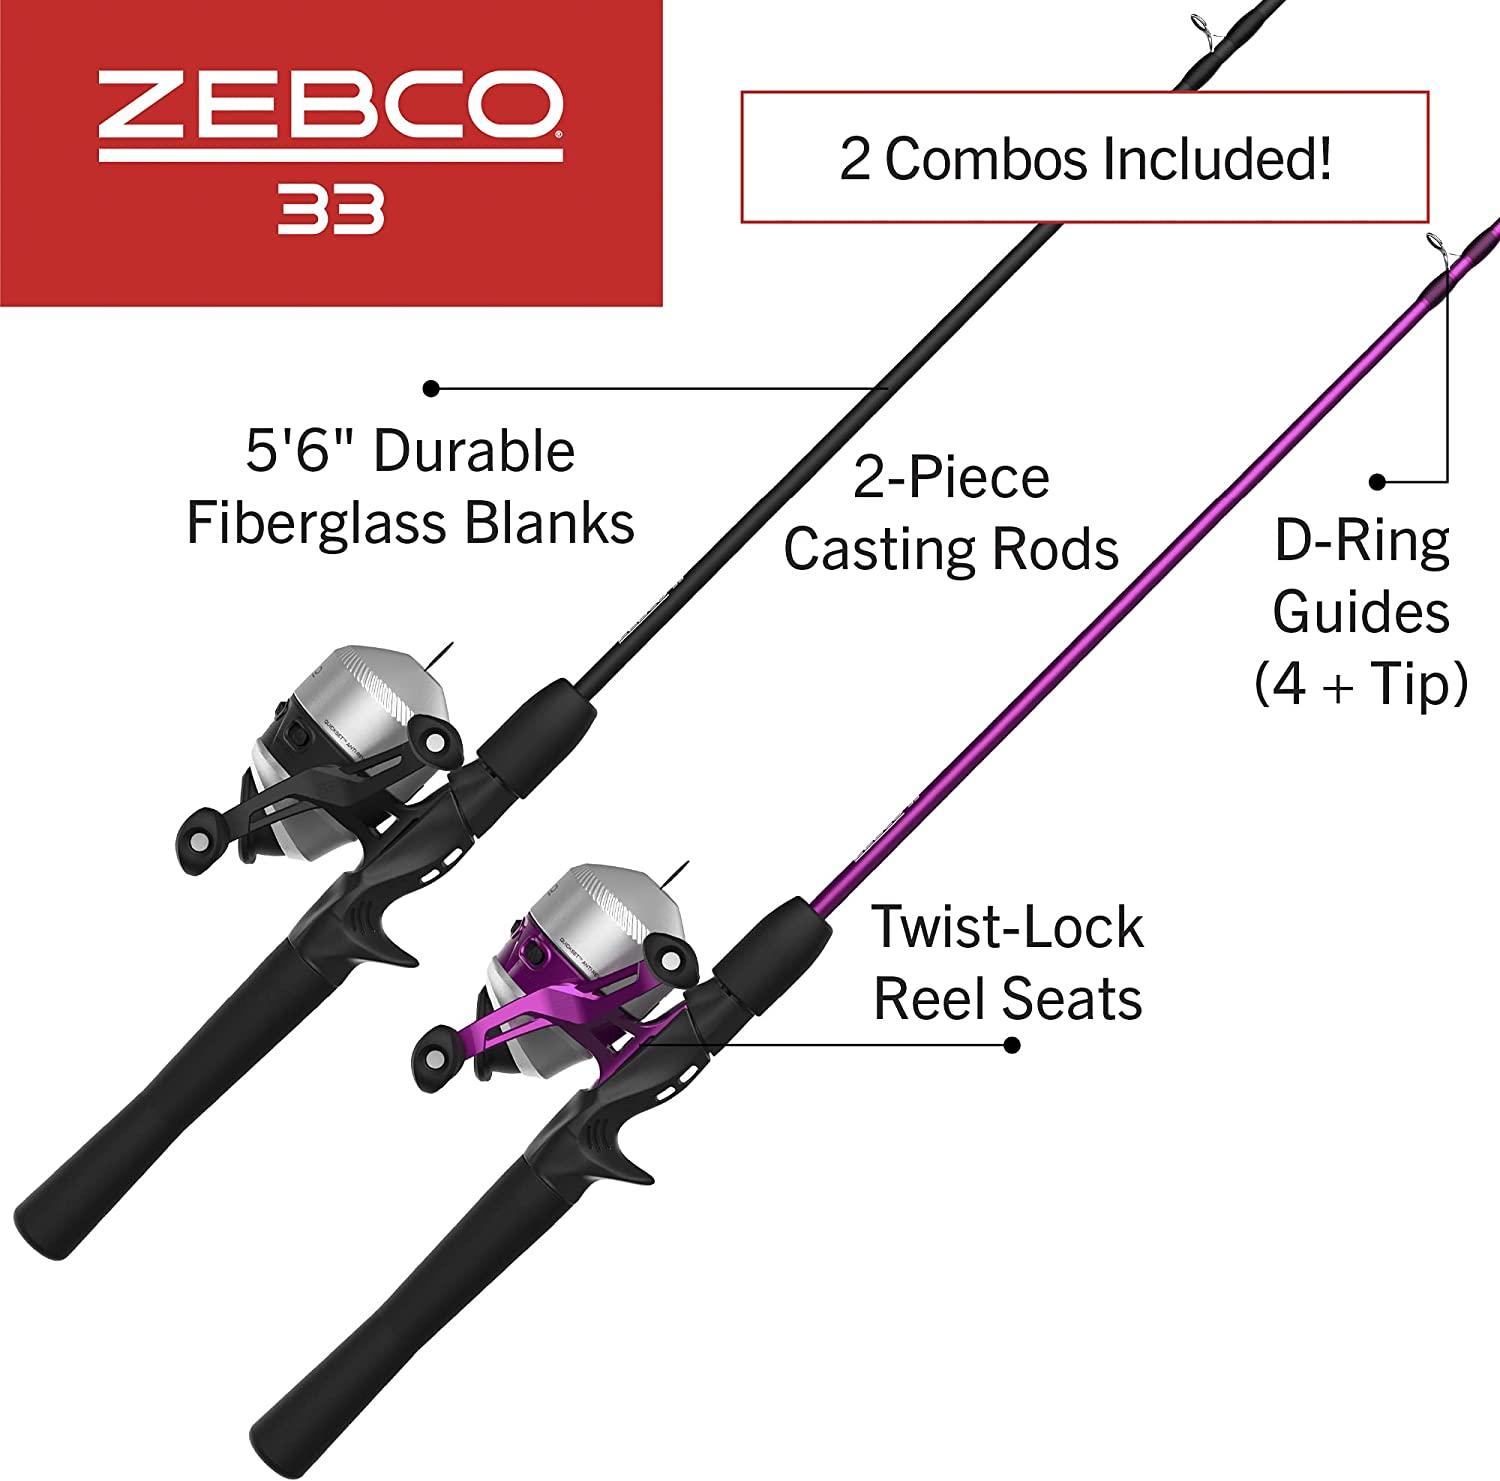 Zebco 33 Cork Micro Spincast Reel and Fishing Rod Combo, 5-Foot 6-Inch  2-Piece Graphite Rod with Cork Handle, Quickset Anti-Reverse Fishing Reel  with Bite Alert, Silver/Black